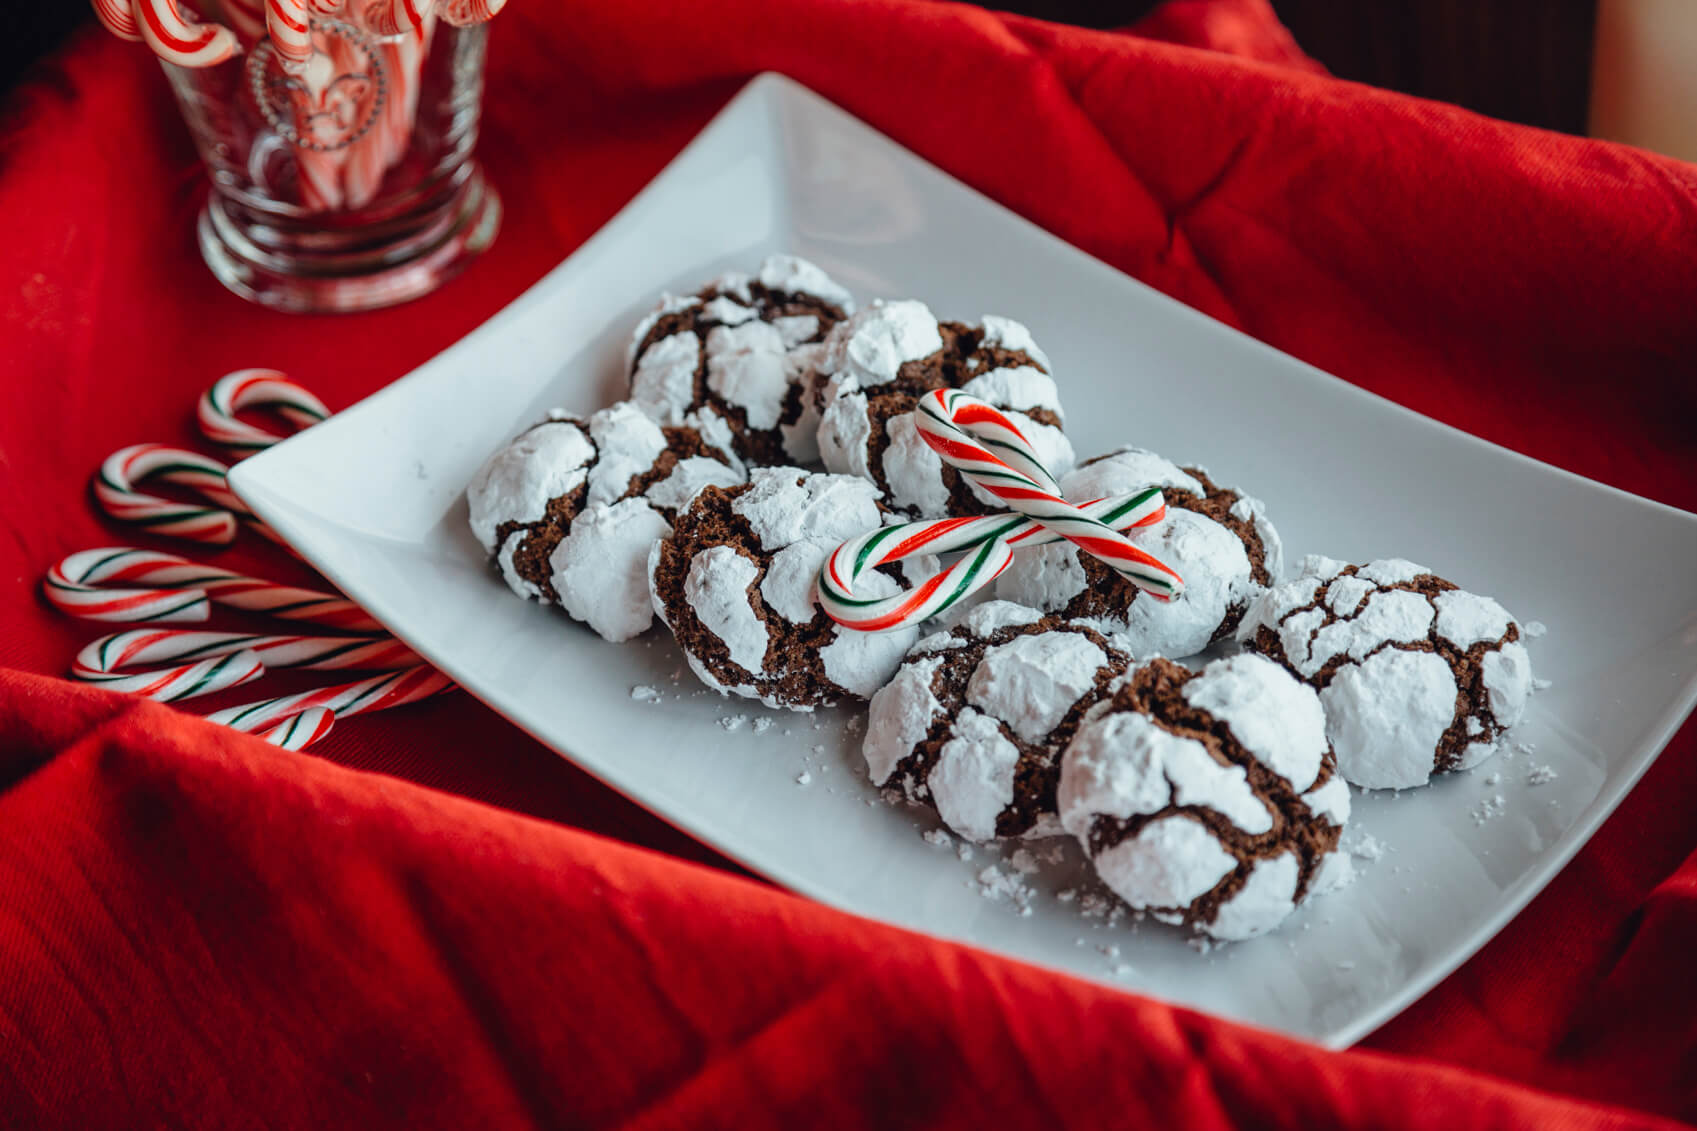 If you want to give these cookies some extra holiday cheer, add a bit of peppermint oil!